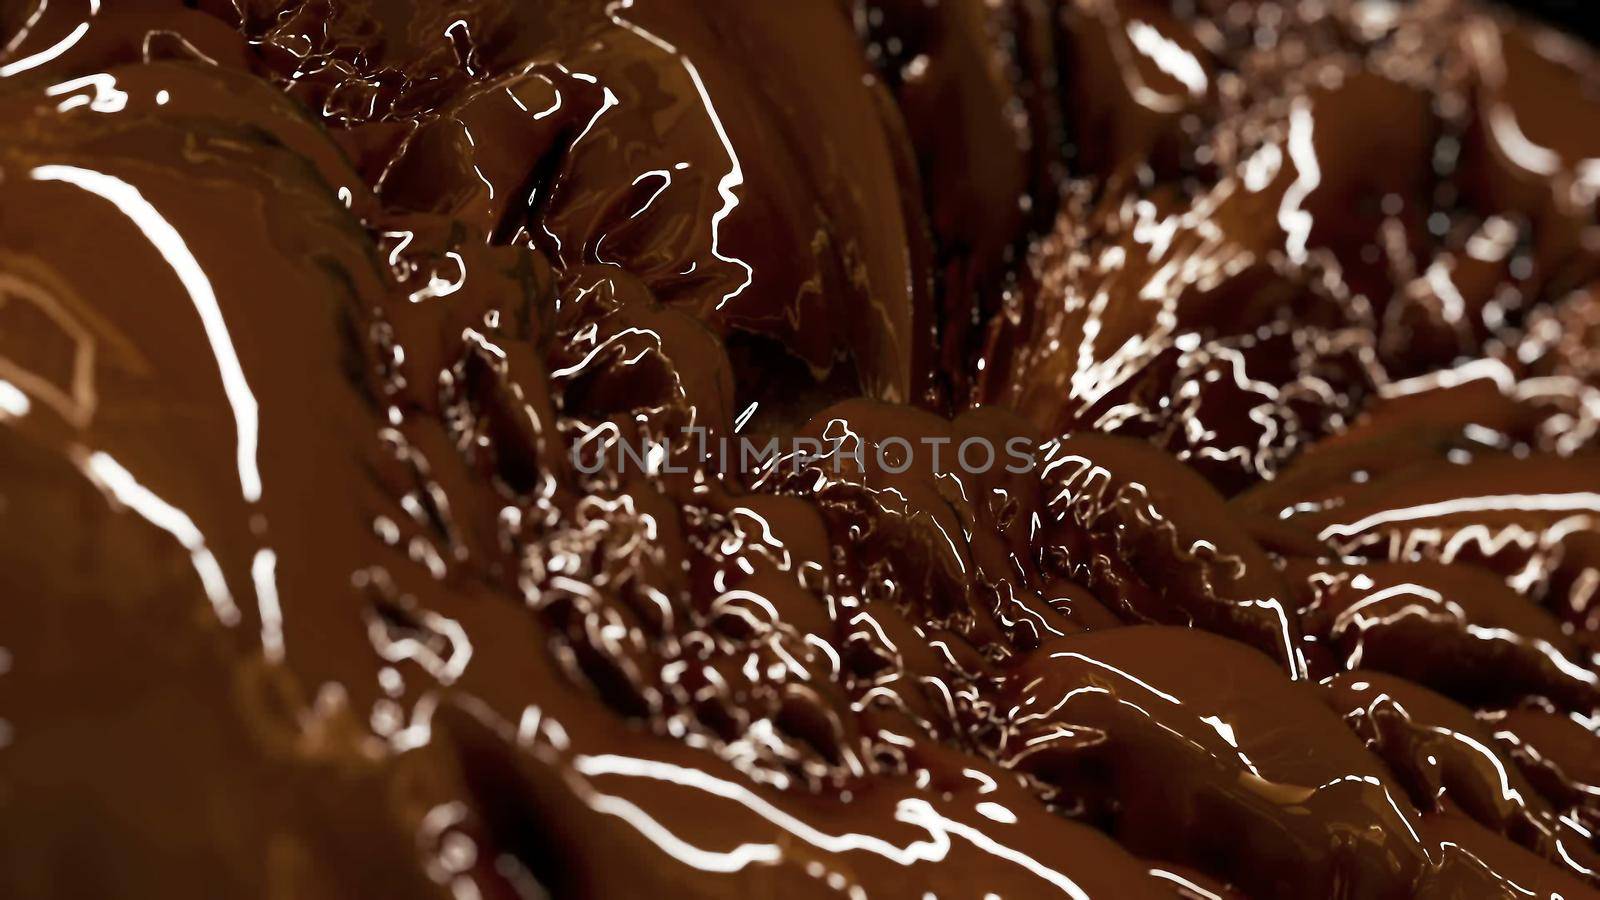 background with Liquid chocolate 3D rendering by designprojects